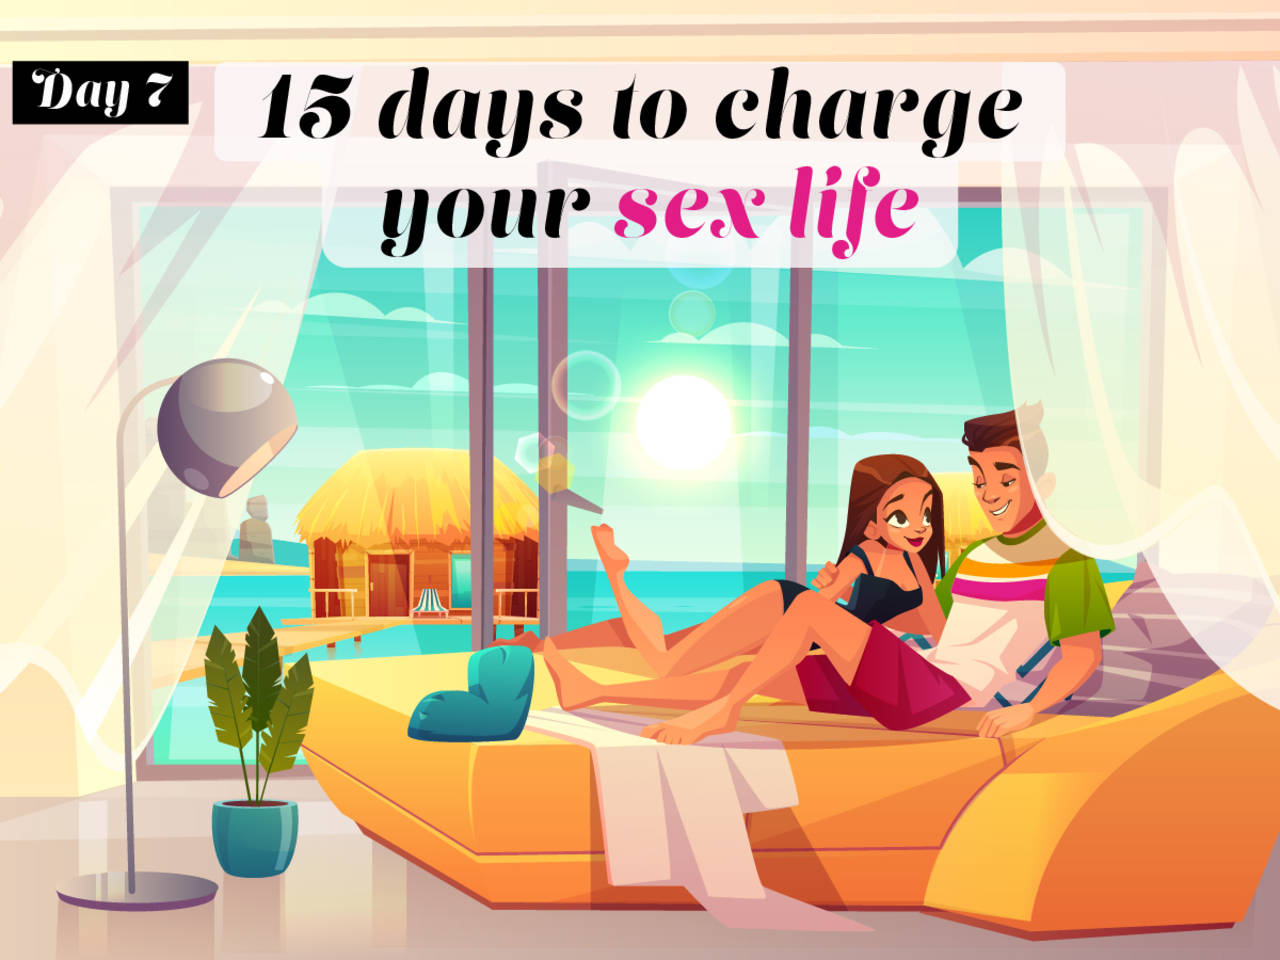 15 days to spice up your sex life in 2020 Blindfold and put on a little show (tip no image pic